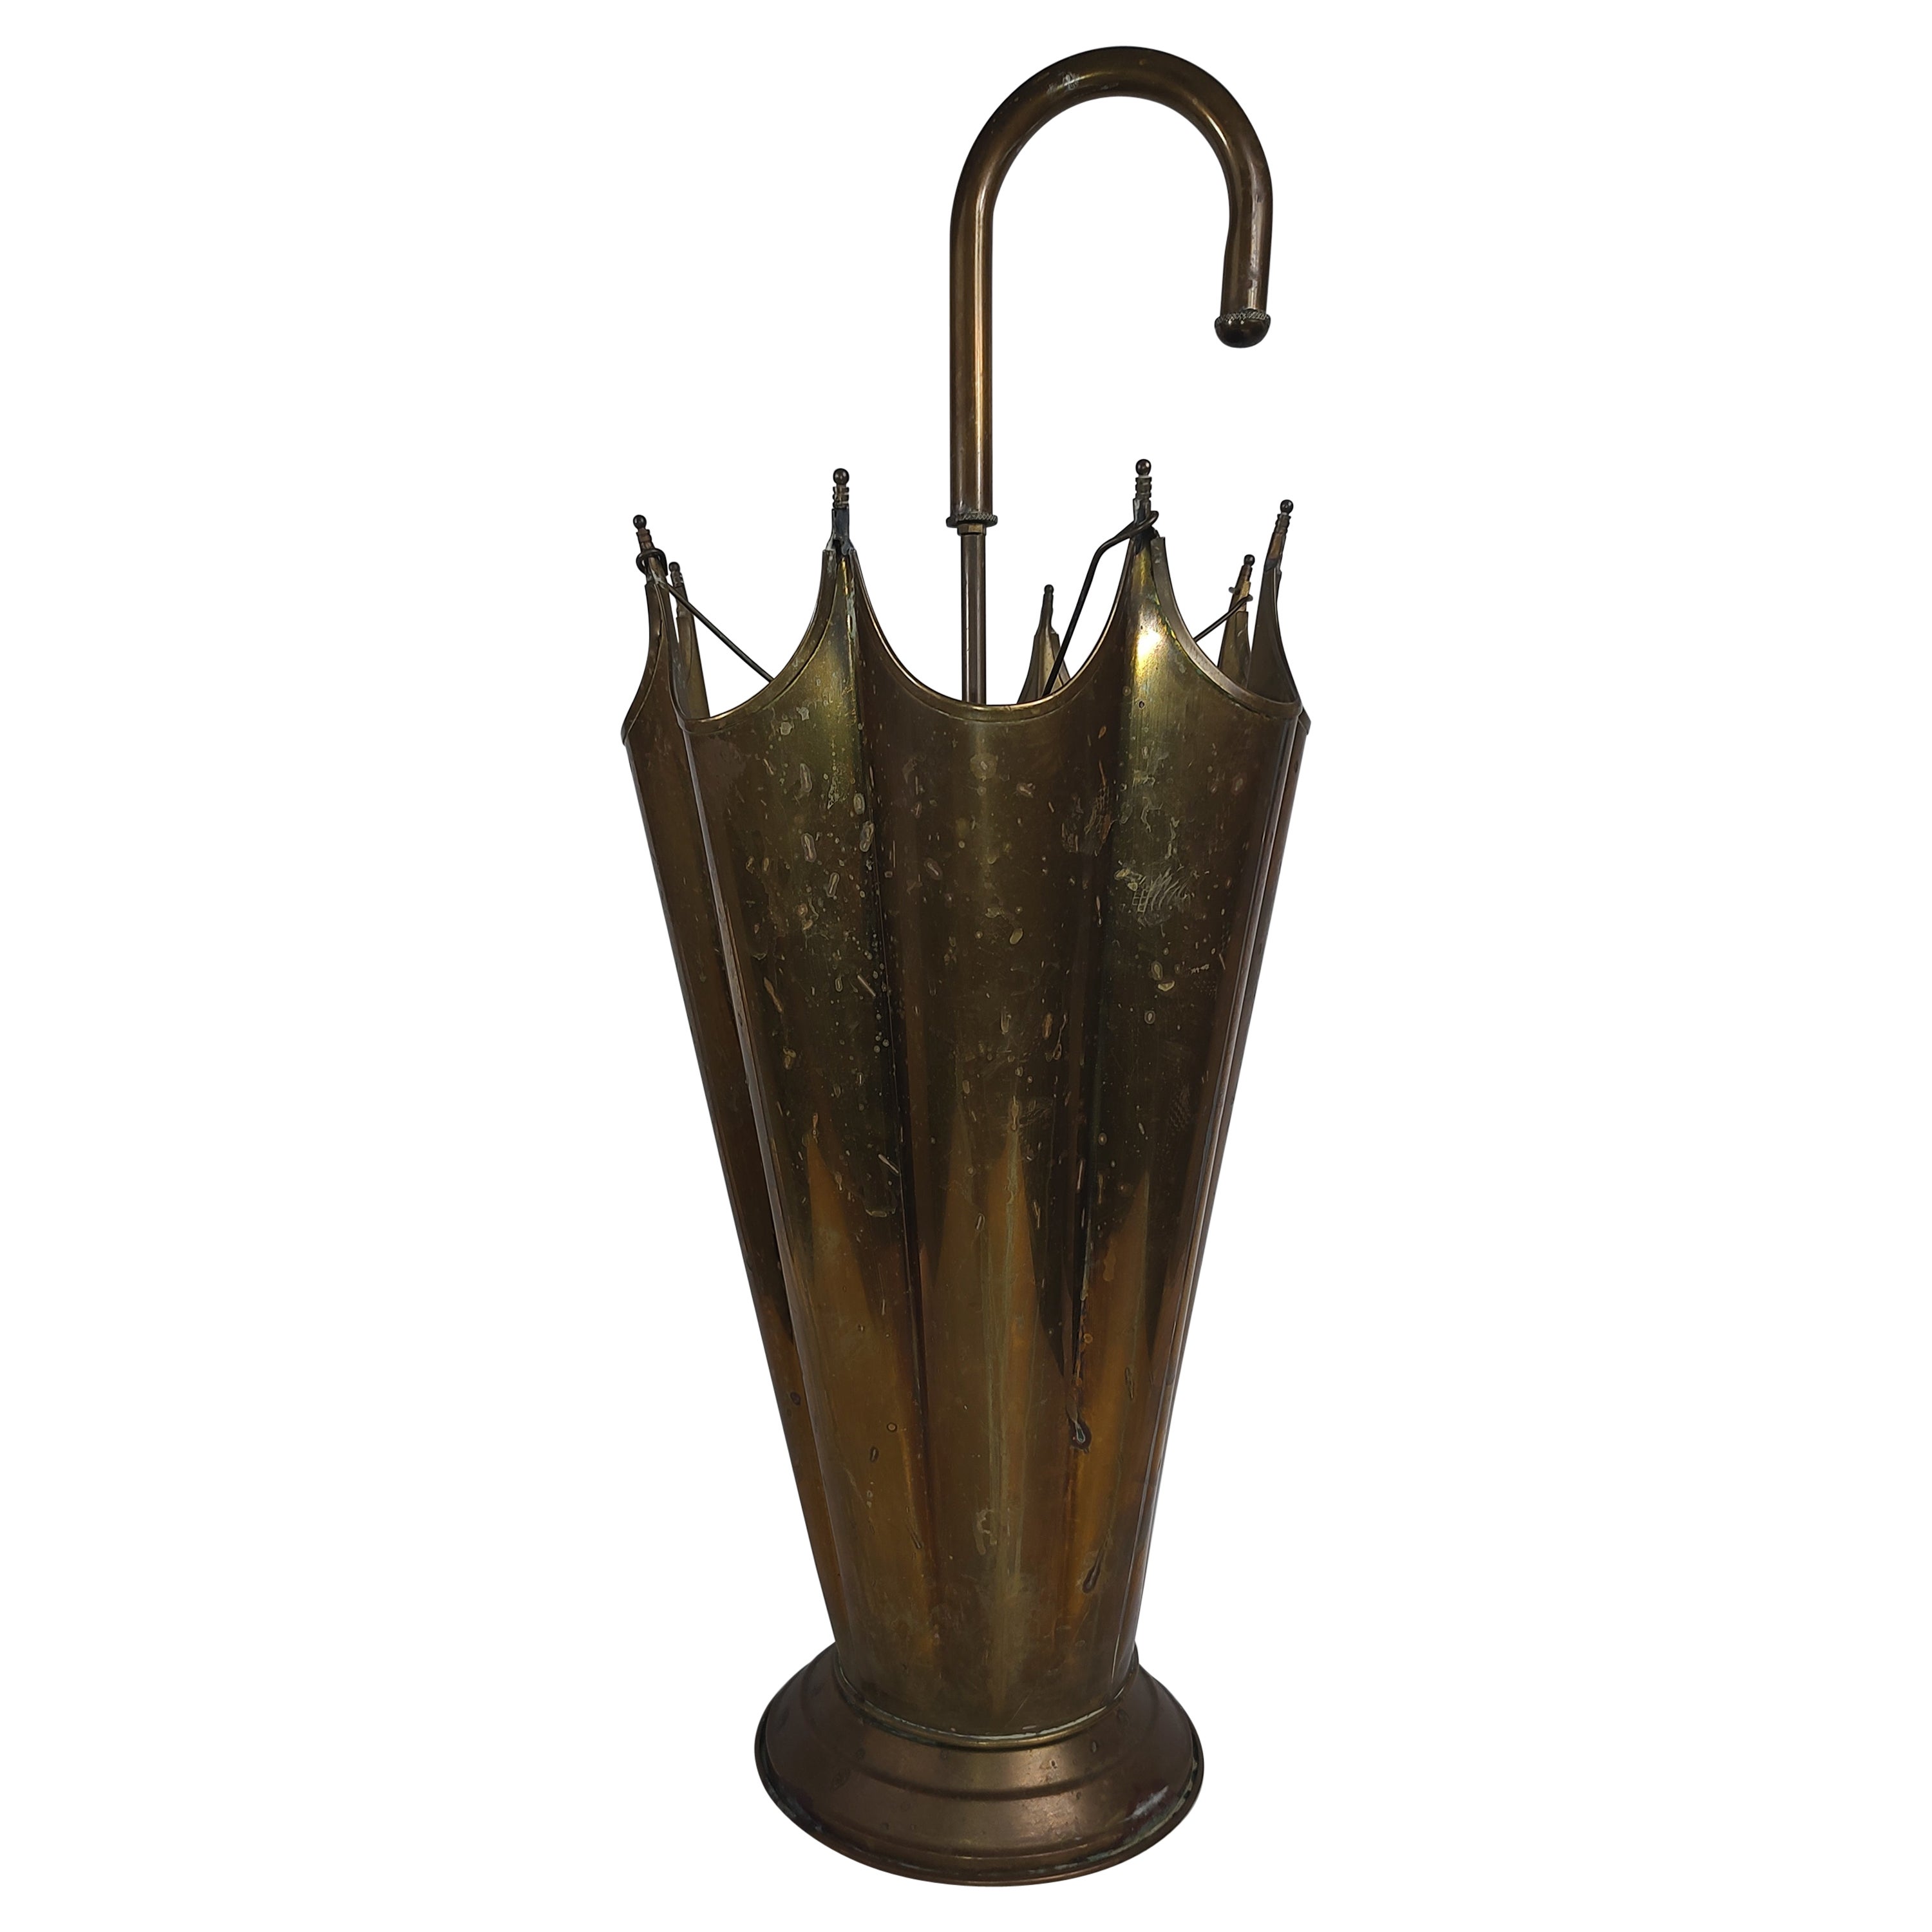 Mid Century Brass Umbrella Form Umbrella Stand, C1955 In Good Condition For Sale In Port Jervis, NY